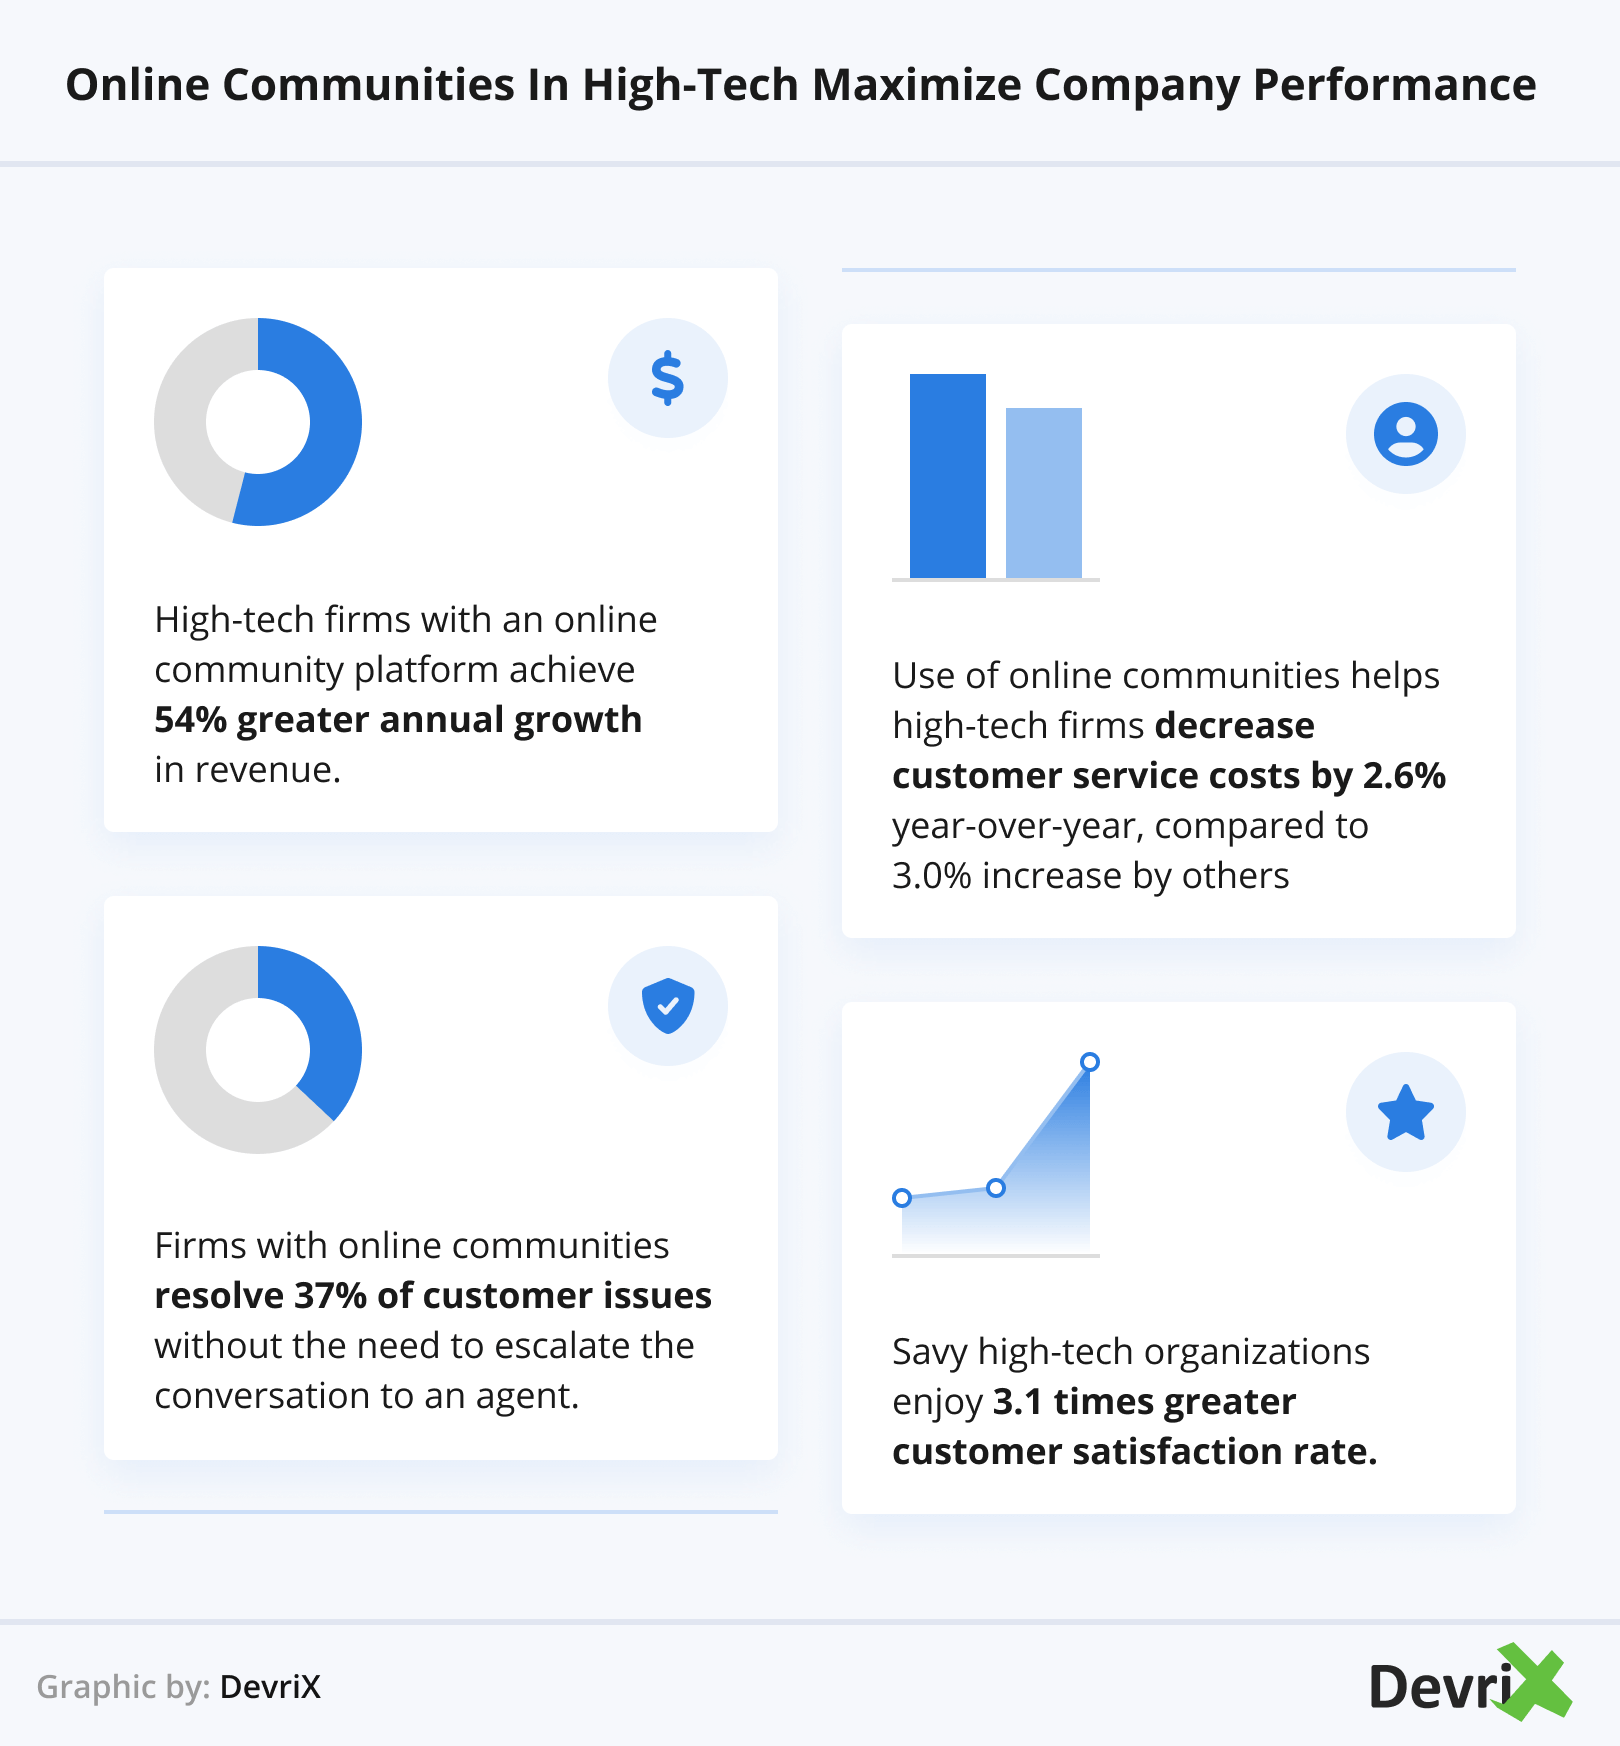 Online Communities in High-Tech Maximize Company Performance